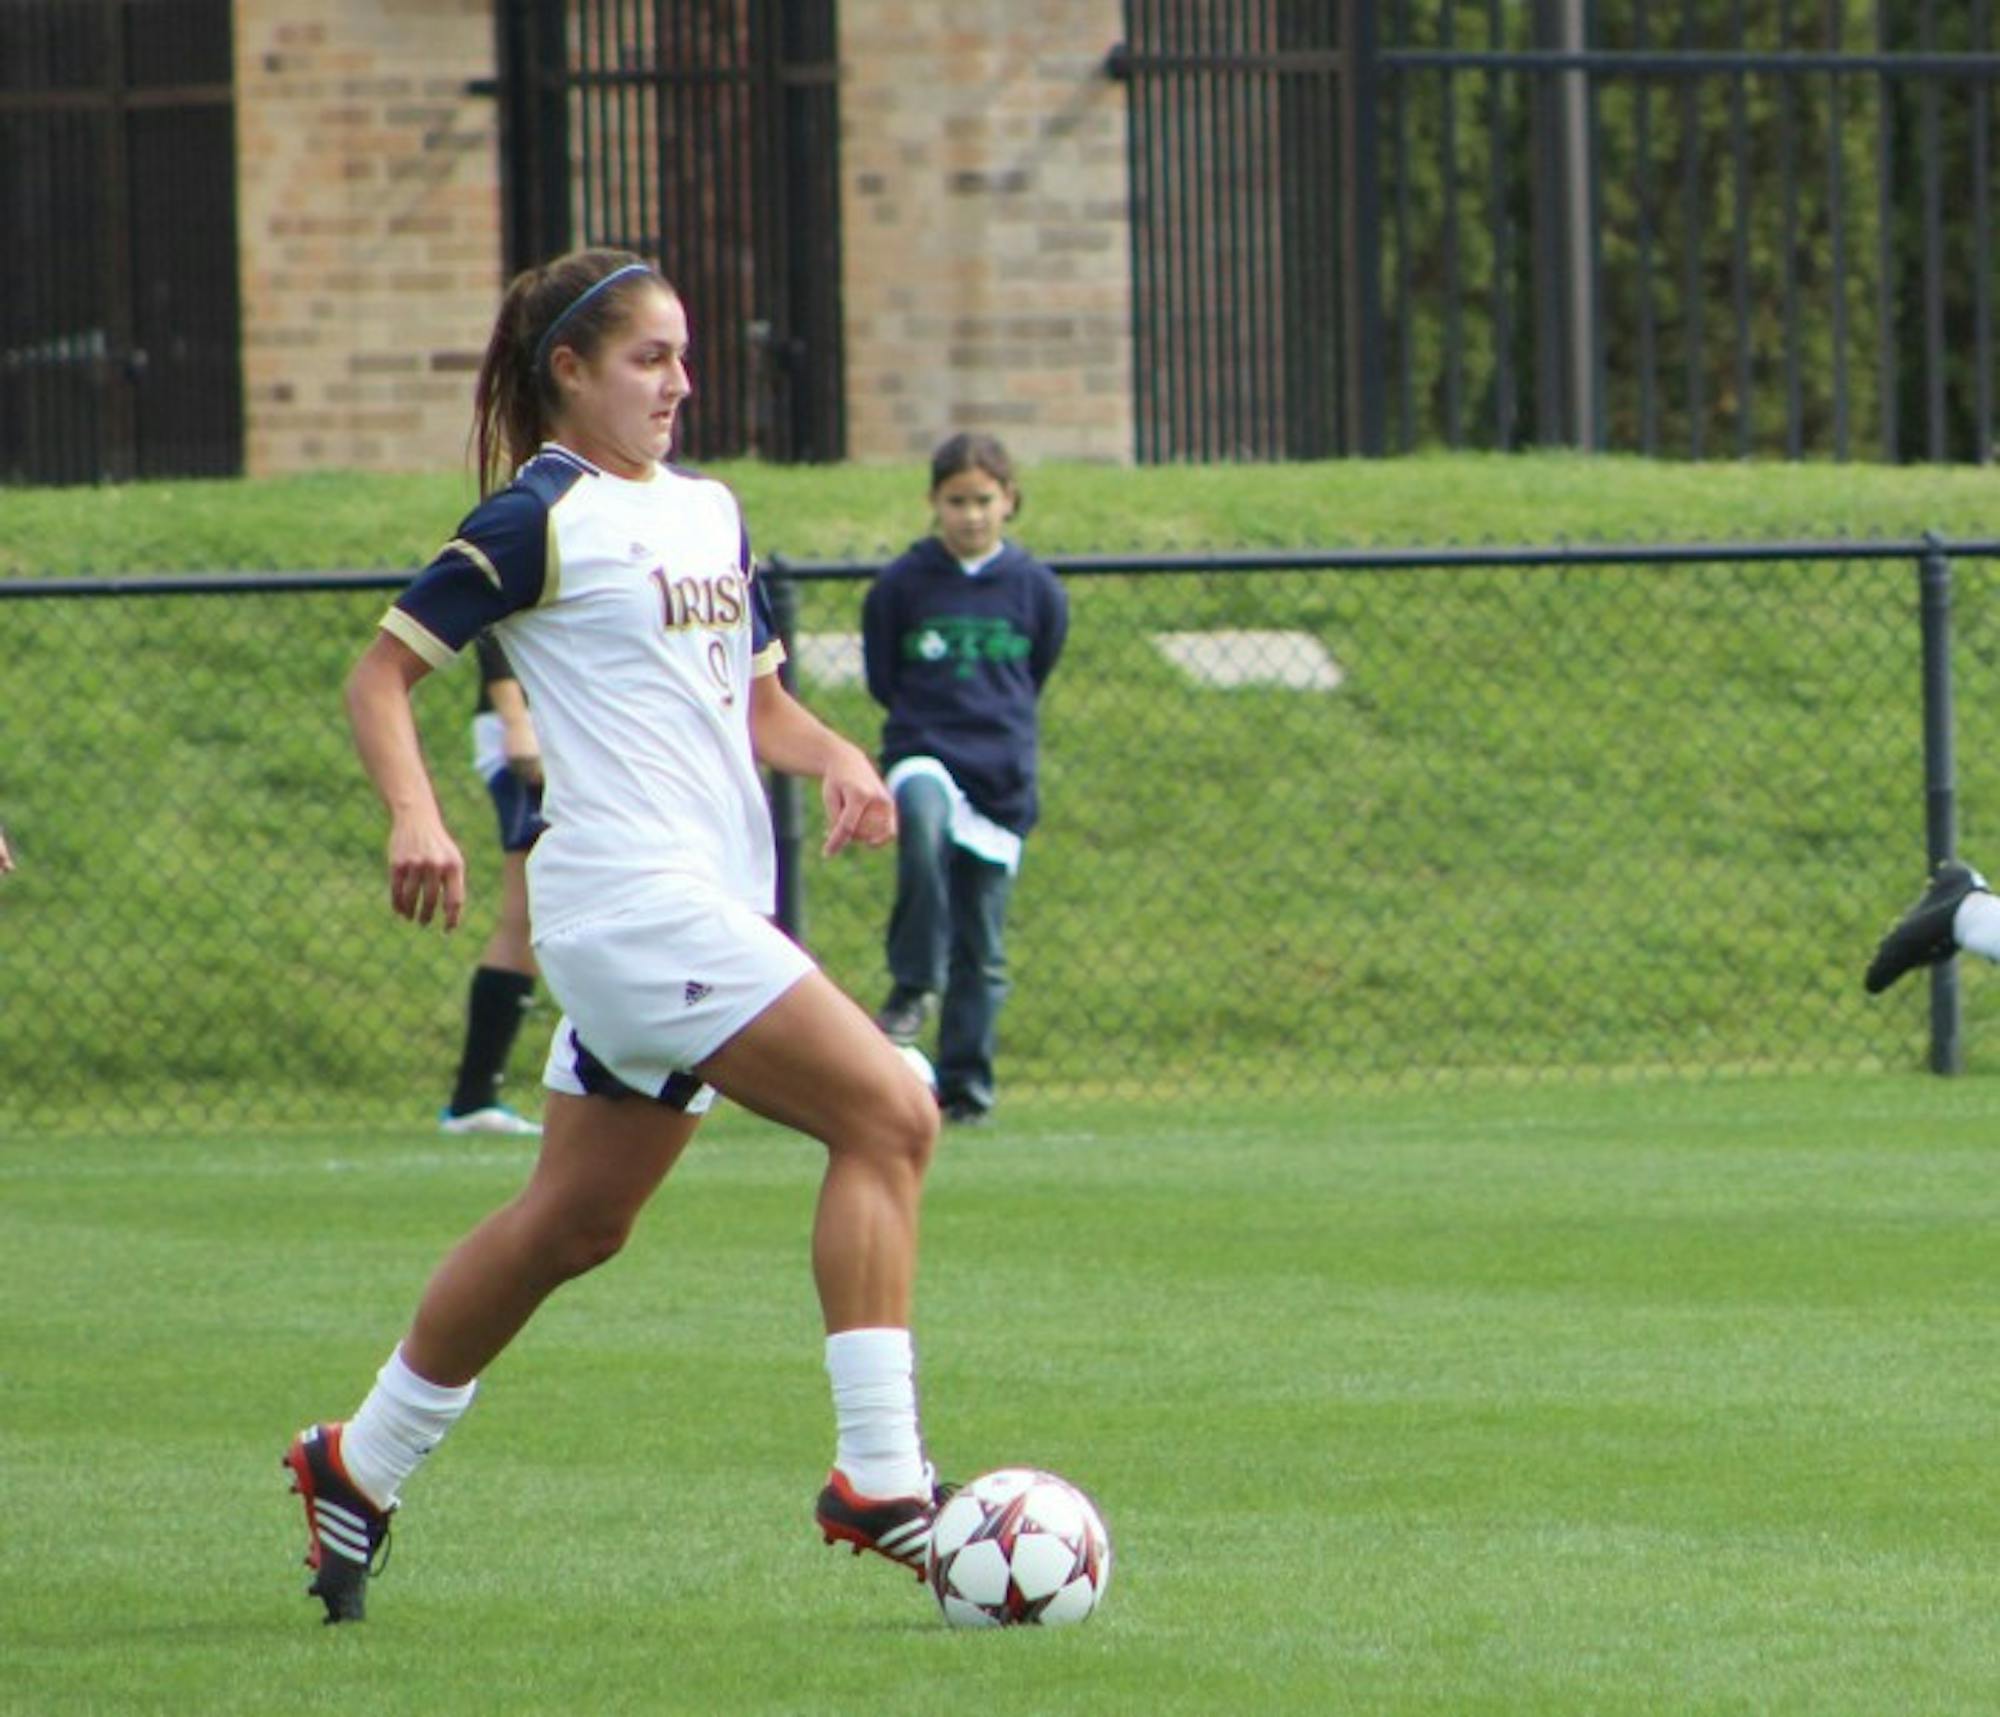 Irish senior forward Lauren Bohaboy looks to pass while dribbling downfield during Notre Dame's 3-0 victory over Pittsburgh on Sept. 29. Bohaboy has scored twice in the 2014 season.